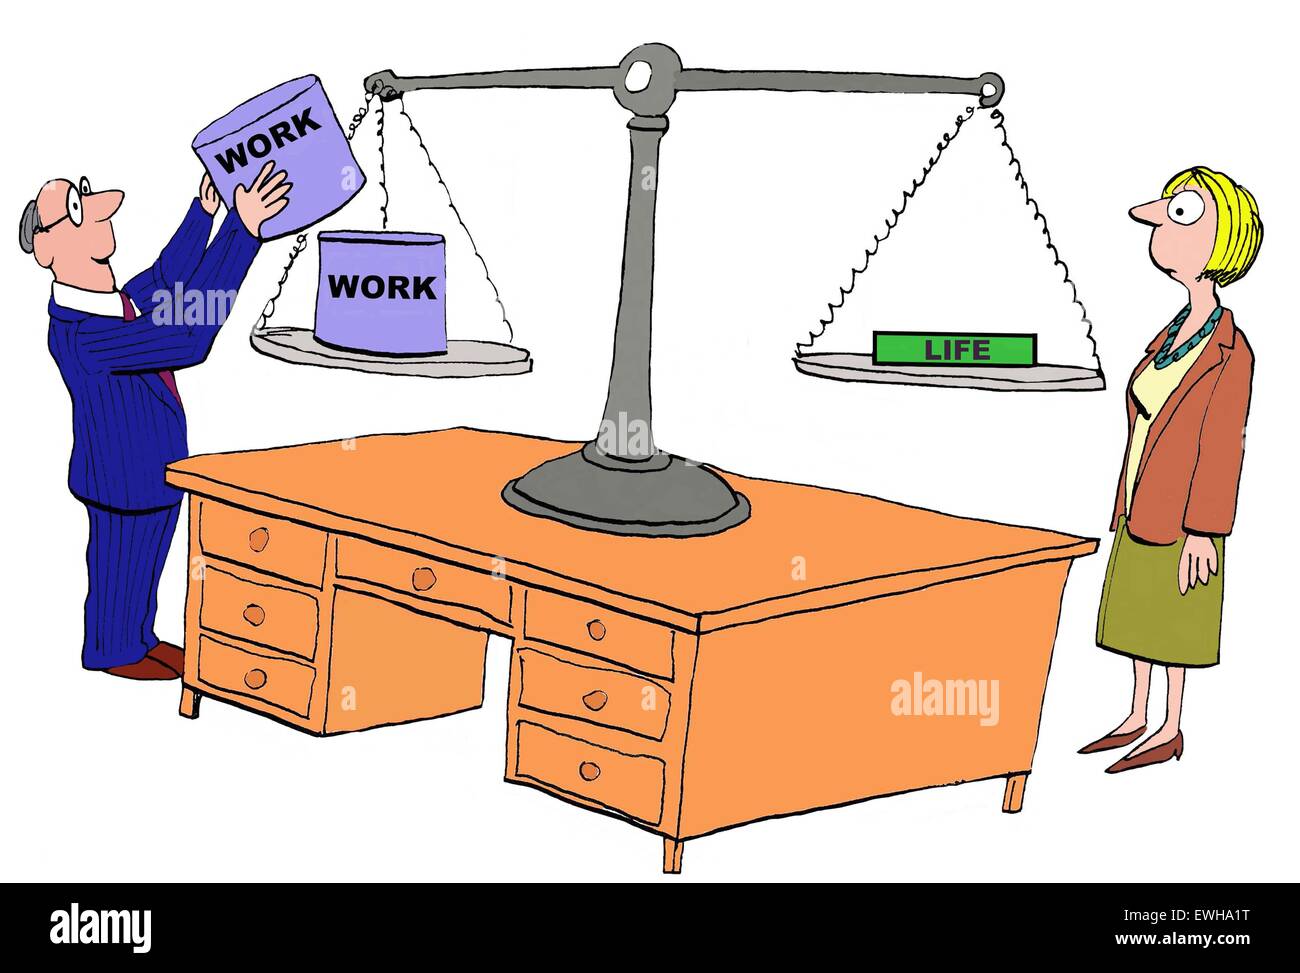 Business cartoon showing boss loading more 'work' onto the businesswoman's scale, very little left for 'life'. Stock Photo